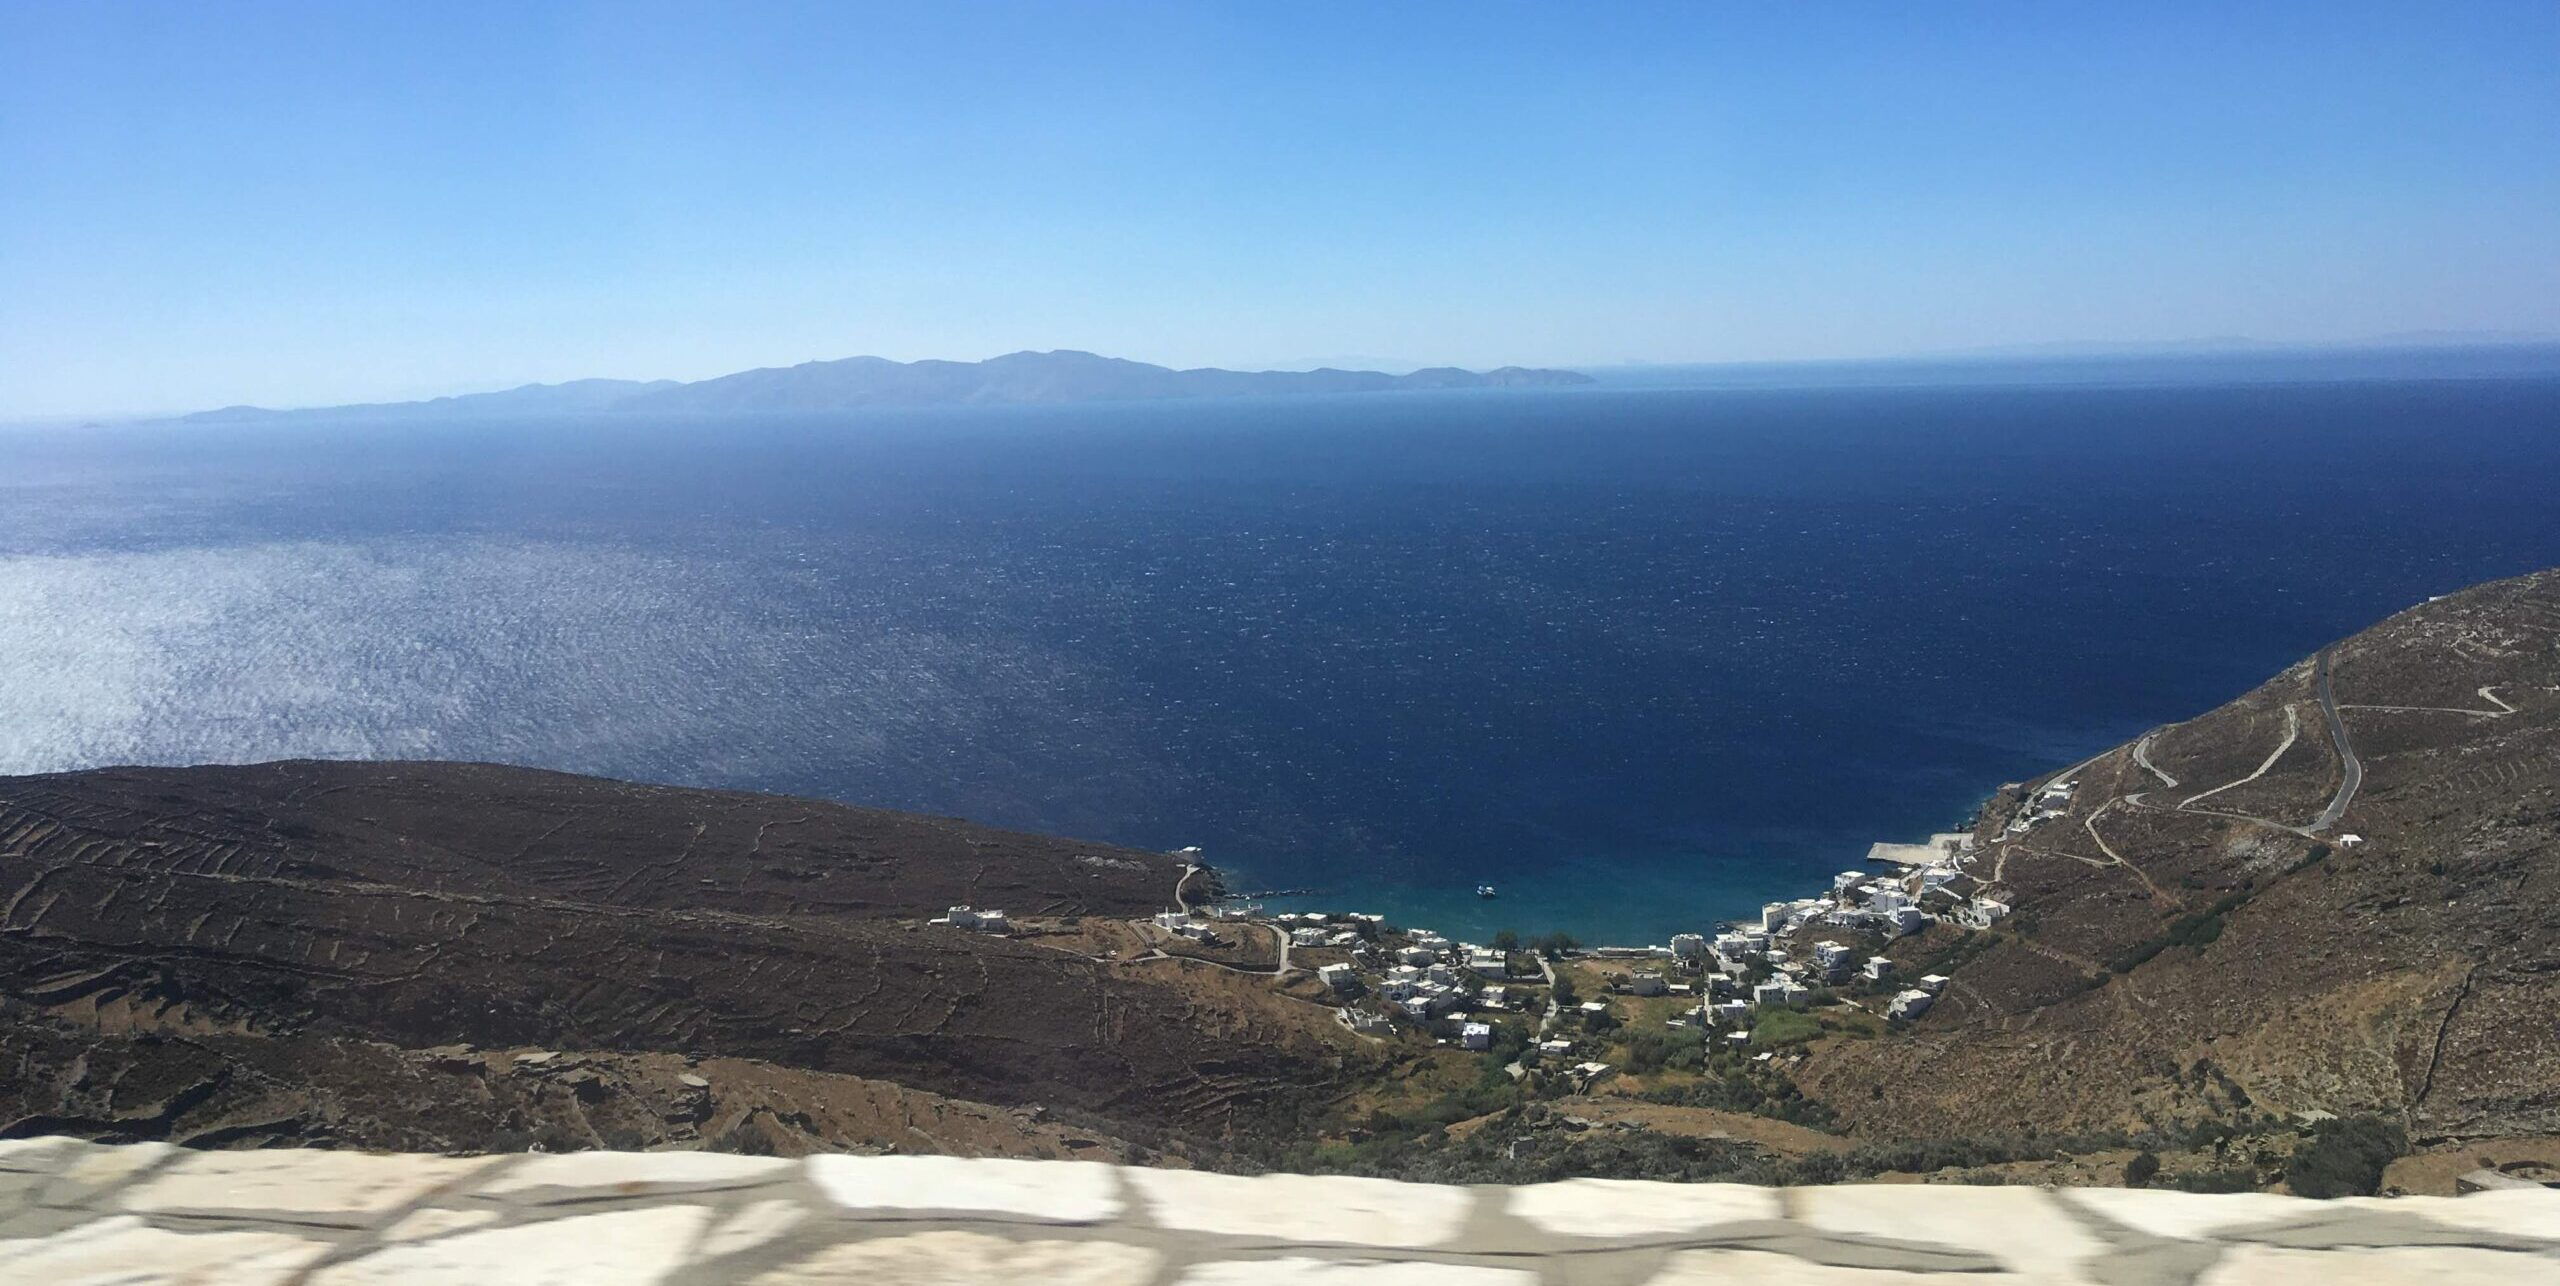 Event 11/10: Circular Economy in the Cyclades – The case of Tinos